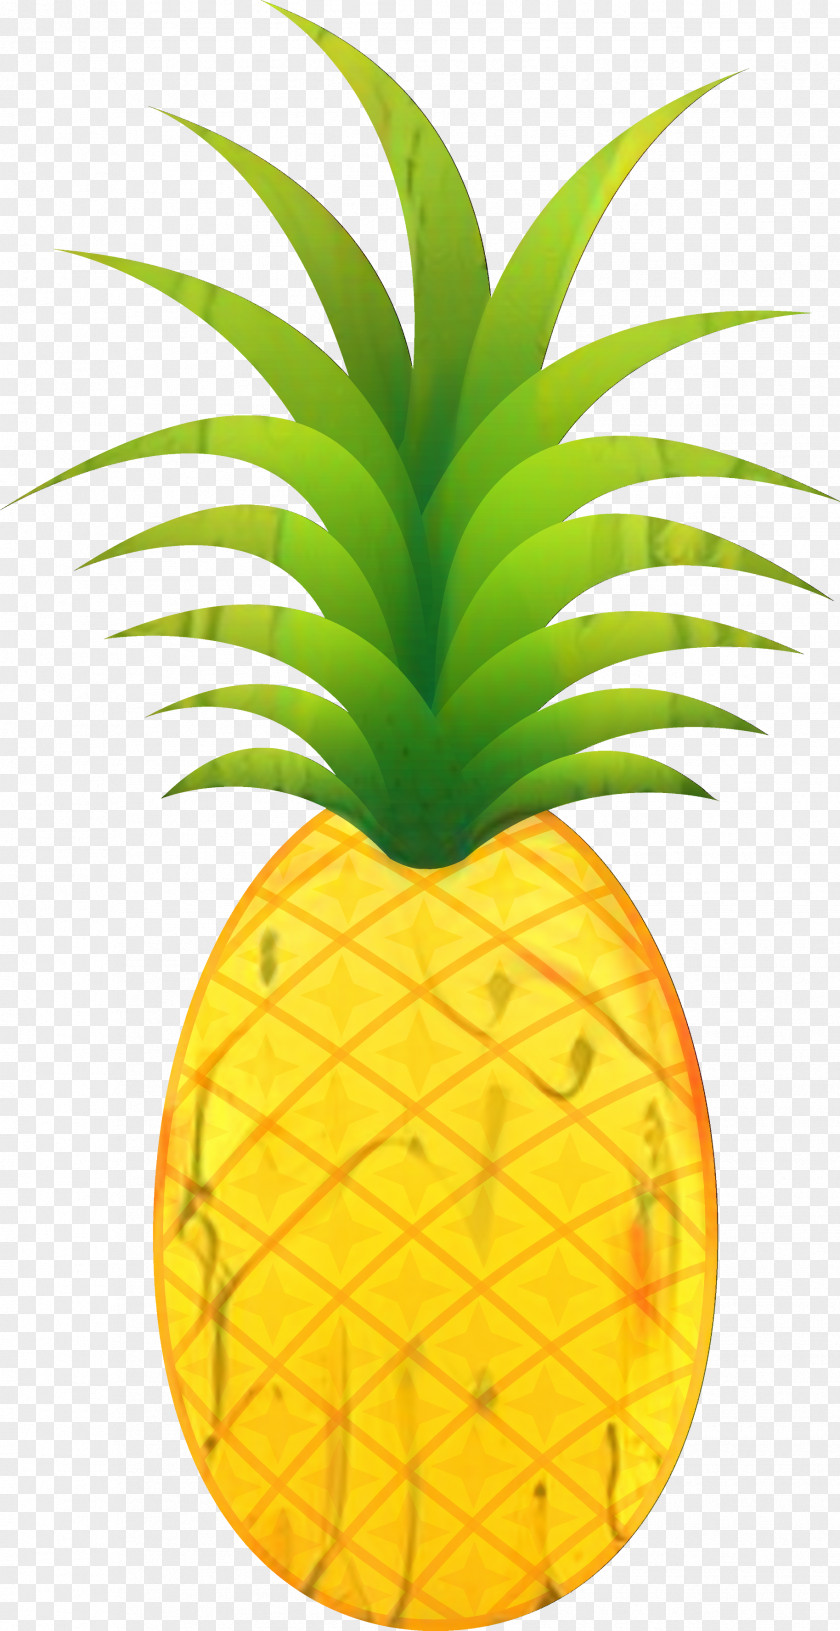 Pineapple Clip Art Image Transparency PNG